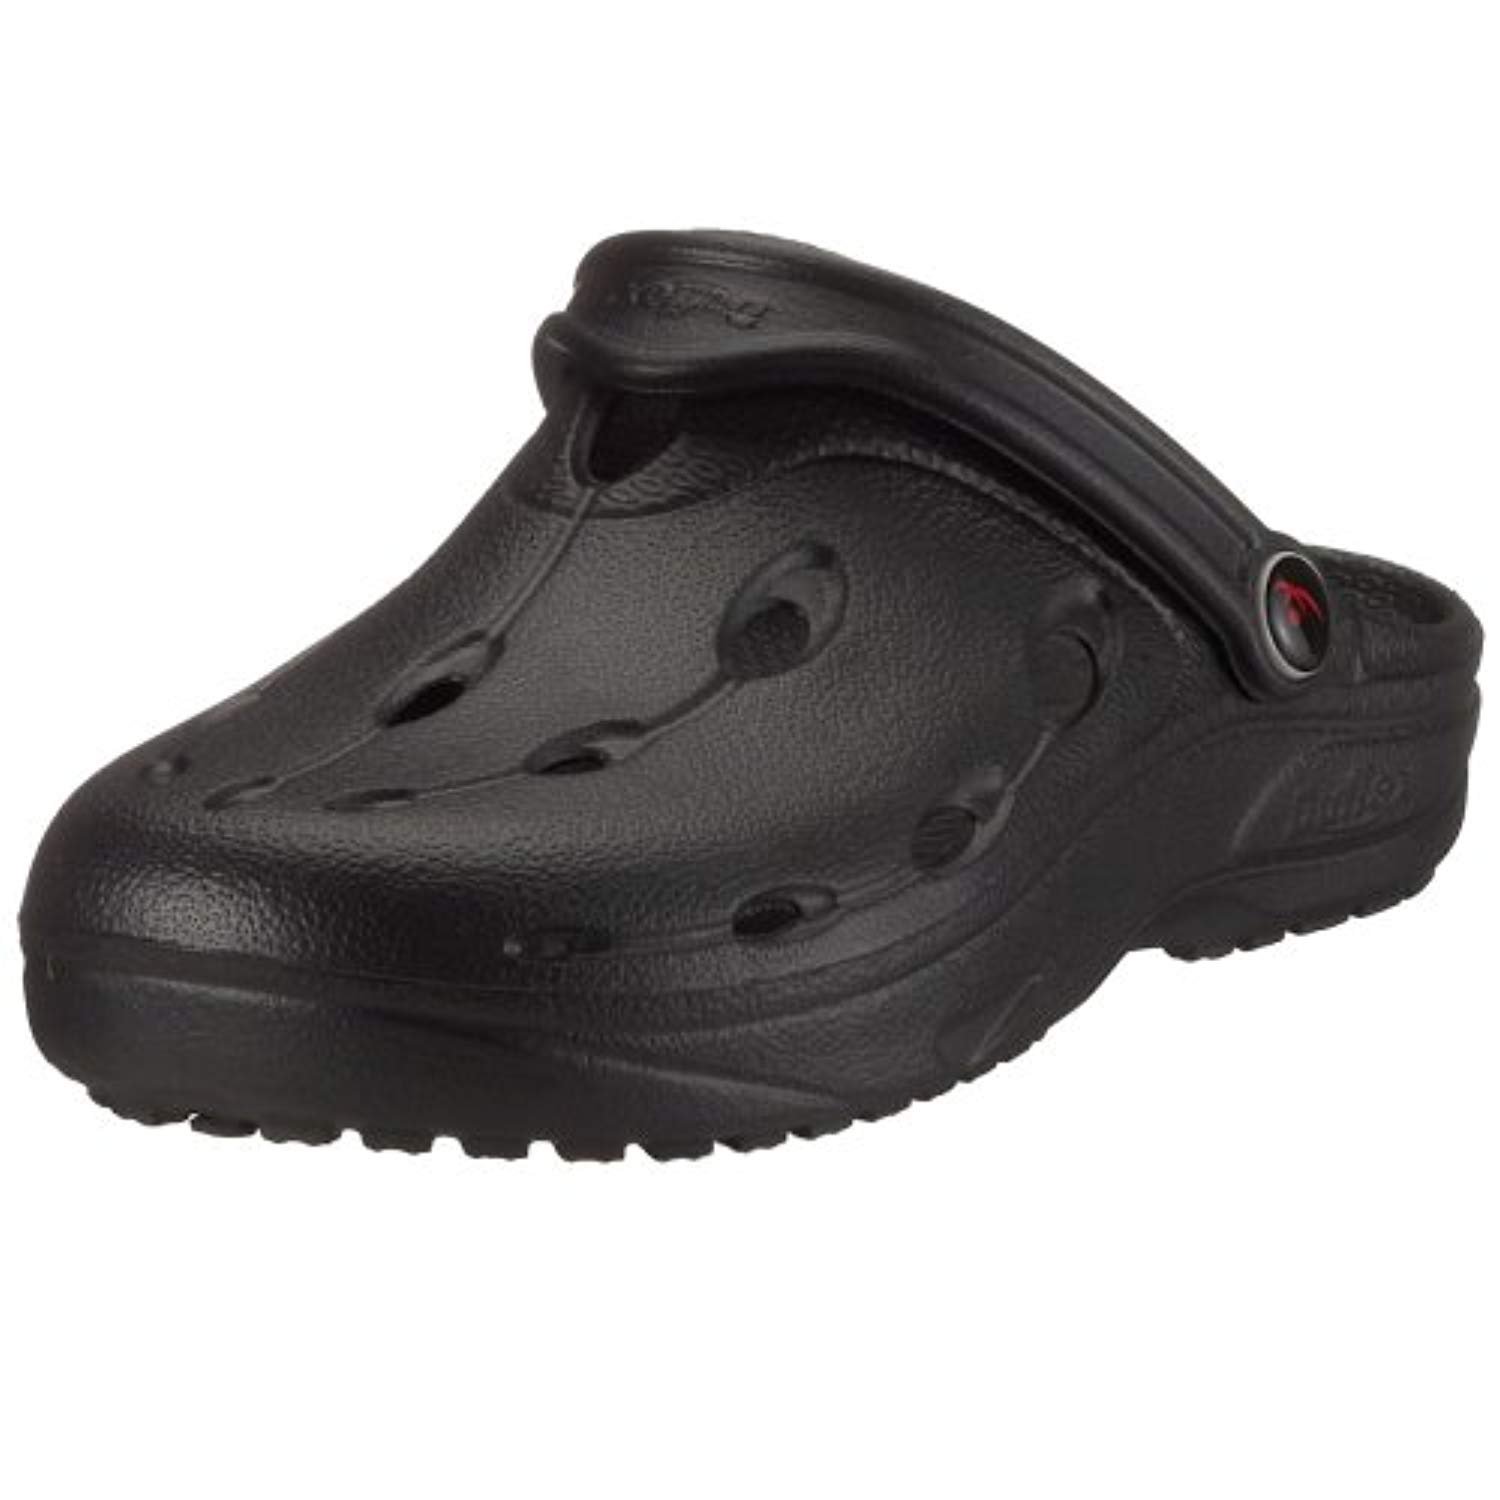 wide clogs with arch support